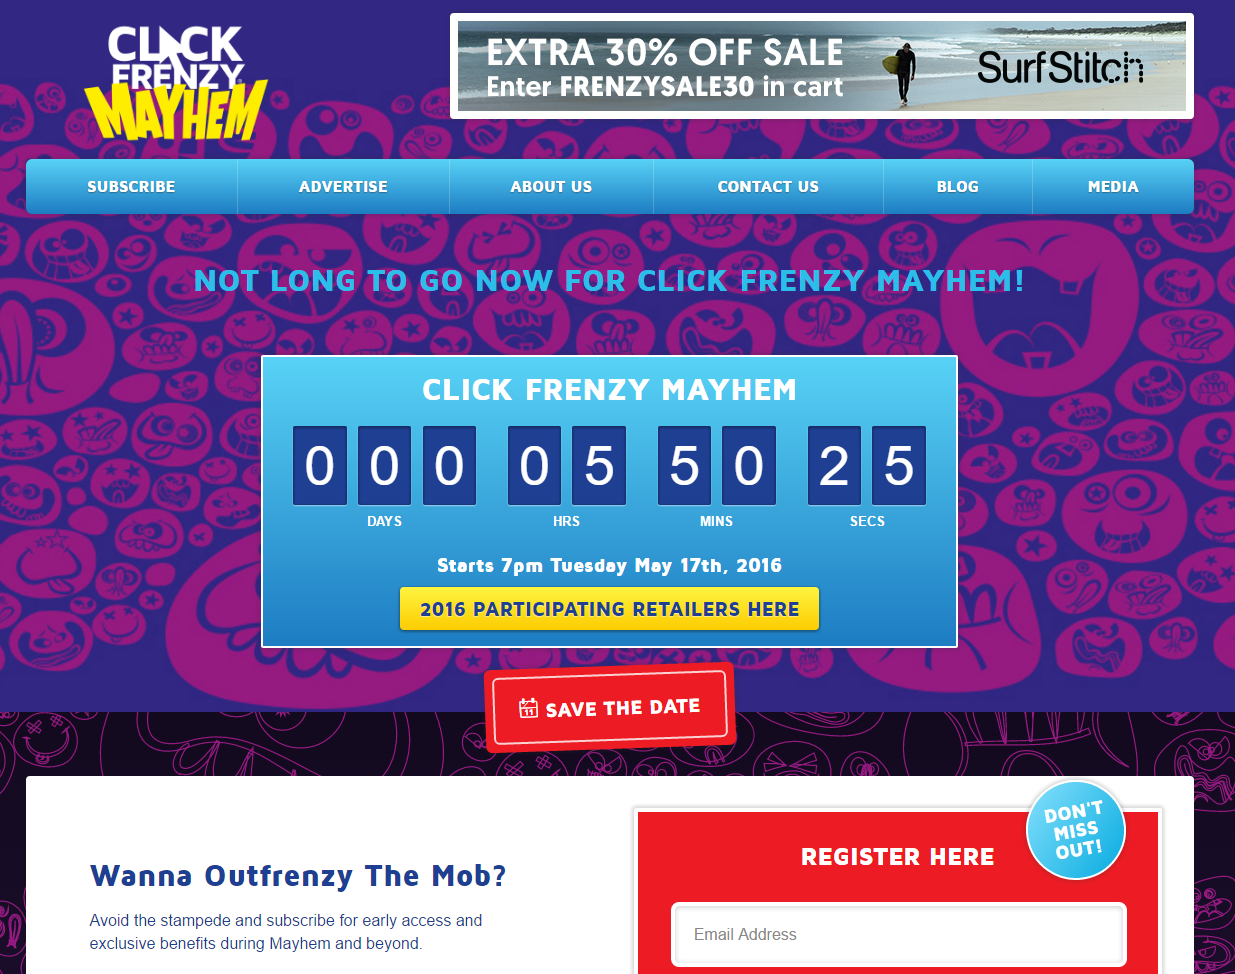 Countdown timer to Click Frenzy